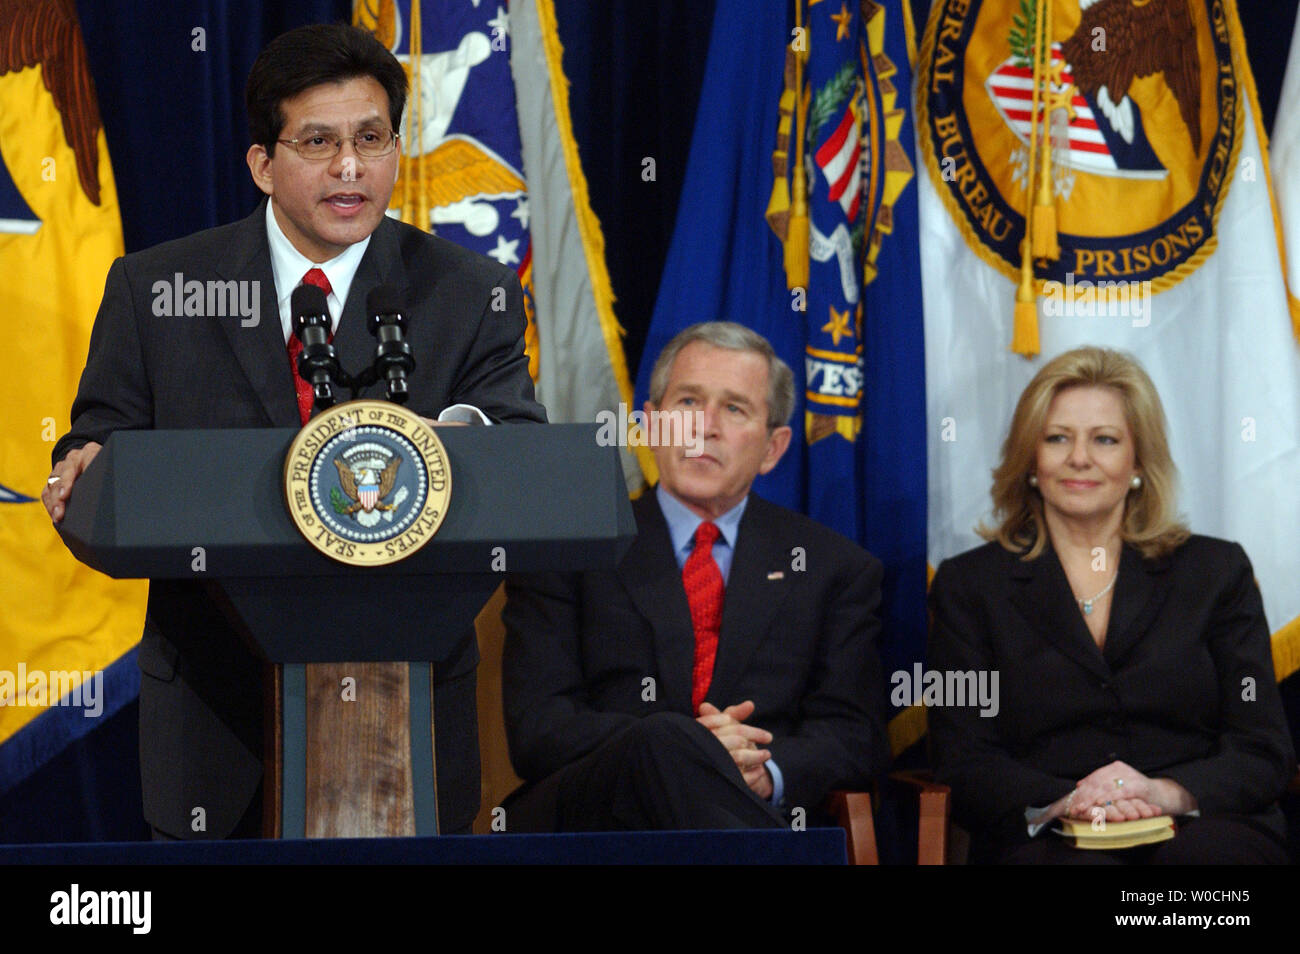 Attorney General Alberto Gonzales speaks, as U.S. President George W. Bush and Gonzales' wife Rebecca look on, after the Attorney General's swearing-in ceremony at the Justice Department in Washington on Feb. 14, 2005.   (UPI Photo/ROGER L. WOLLENBERG) Stock Photo